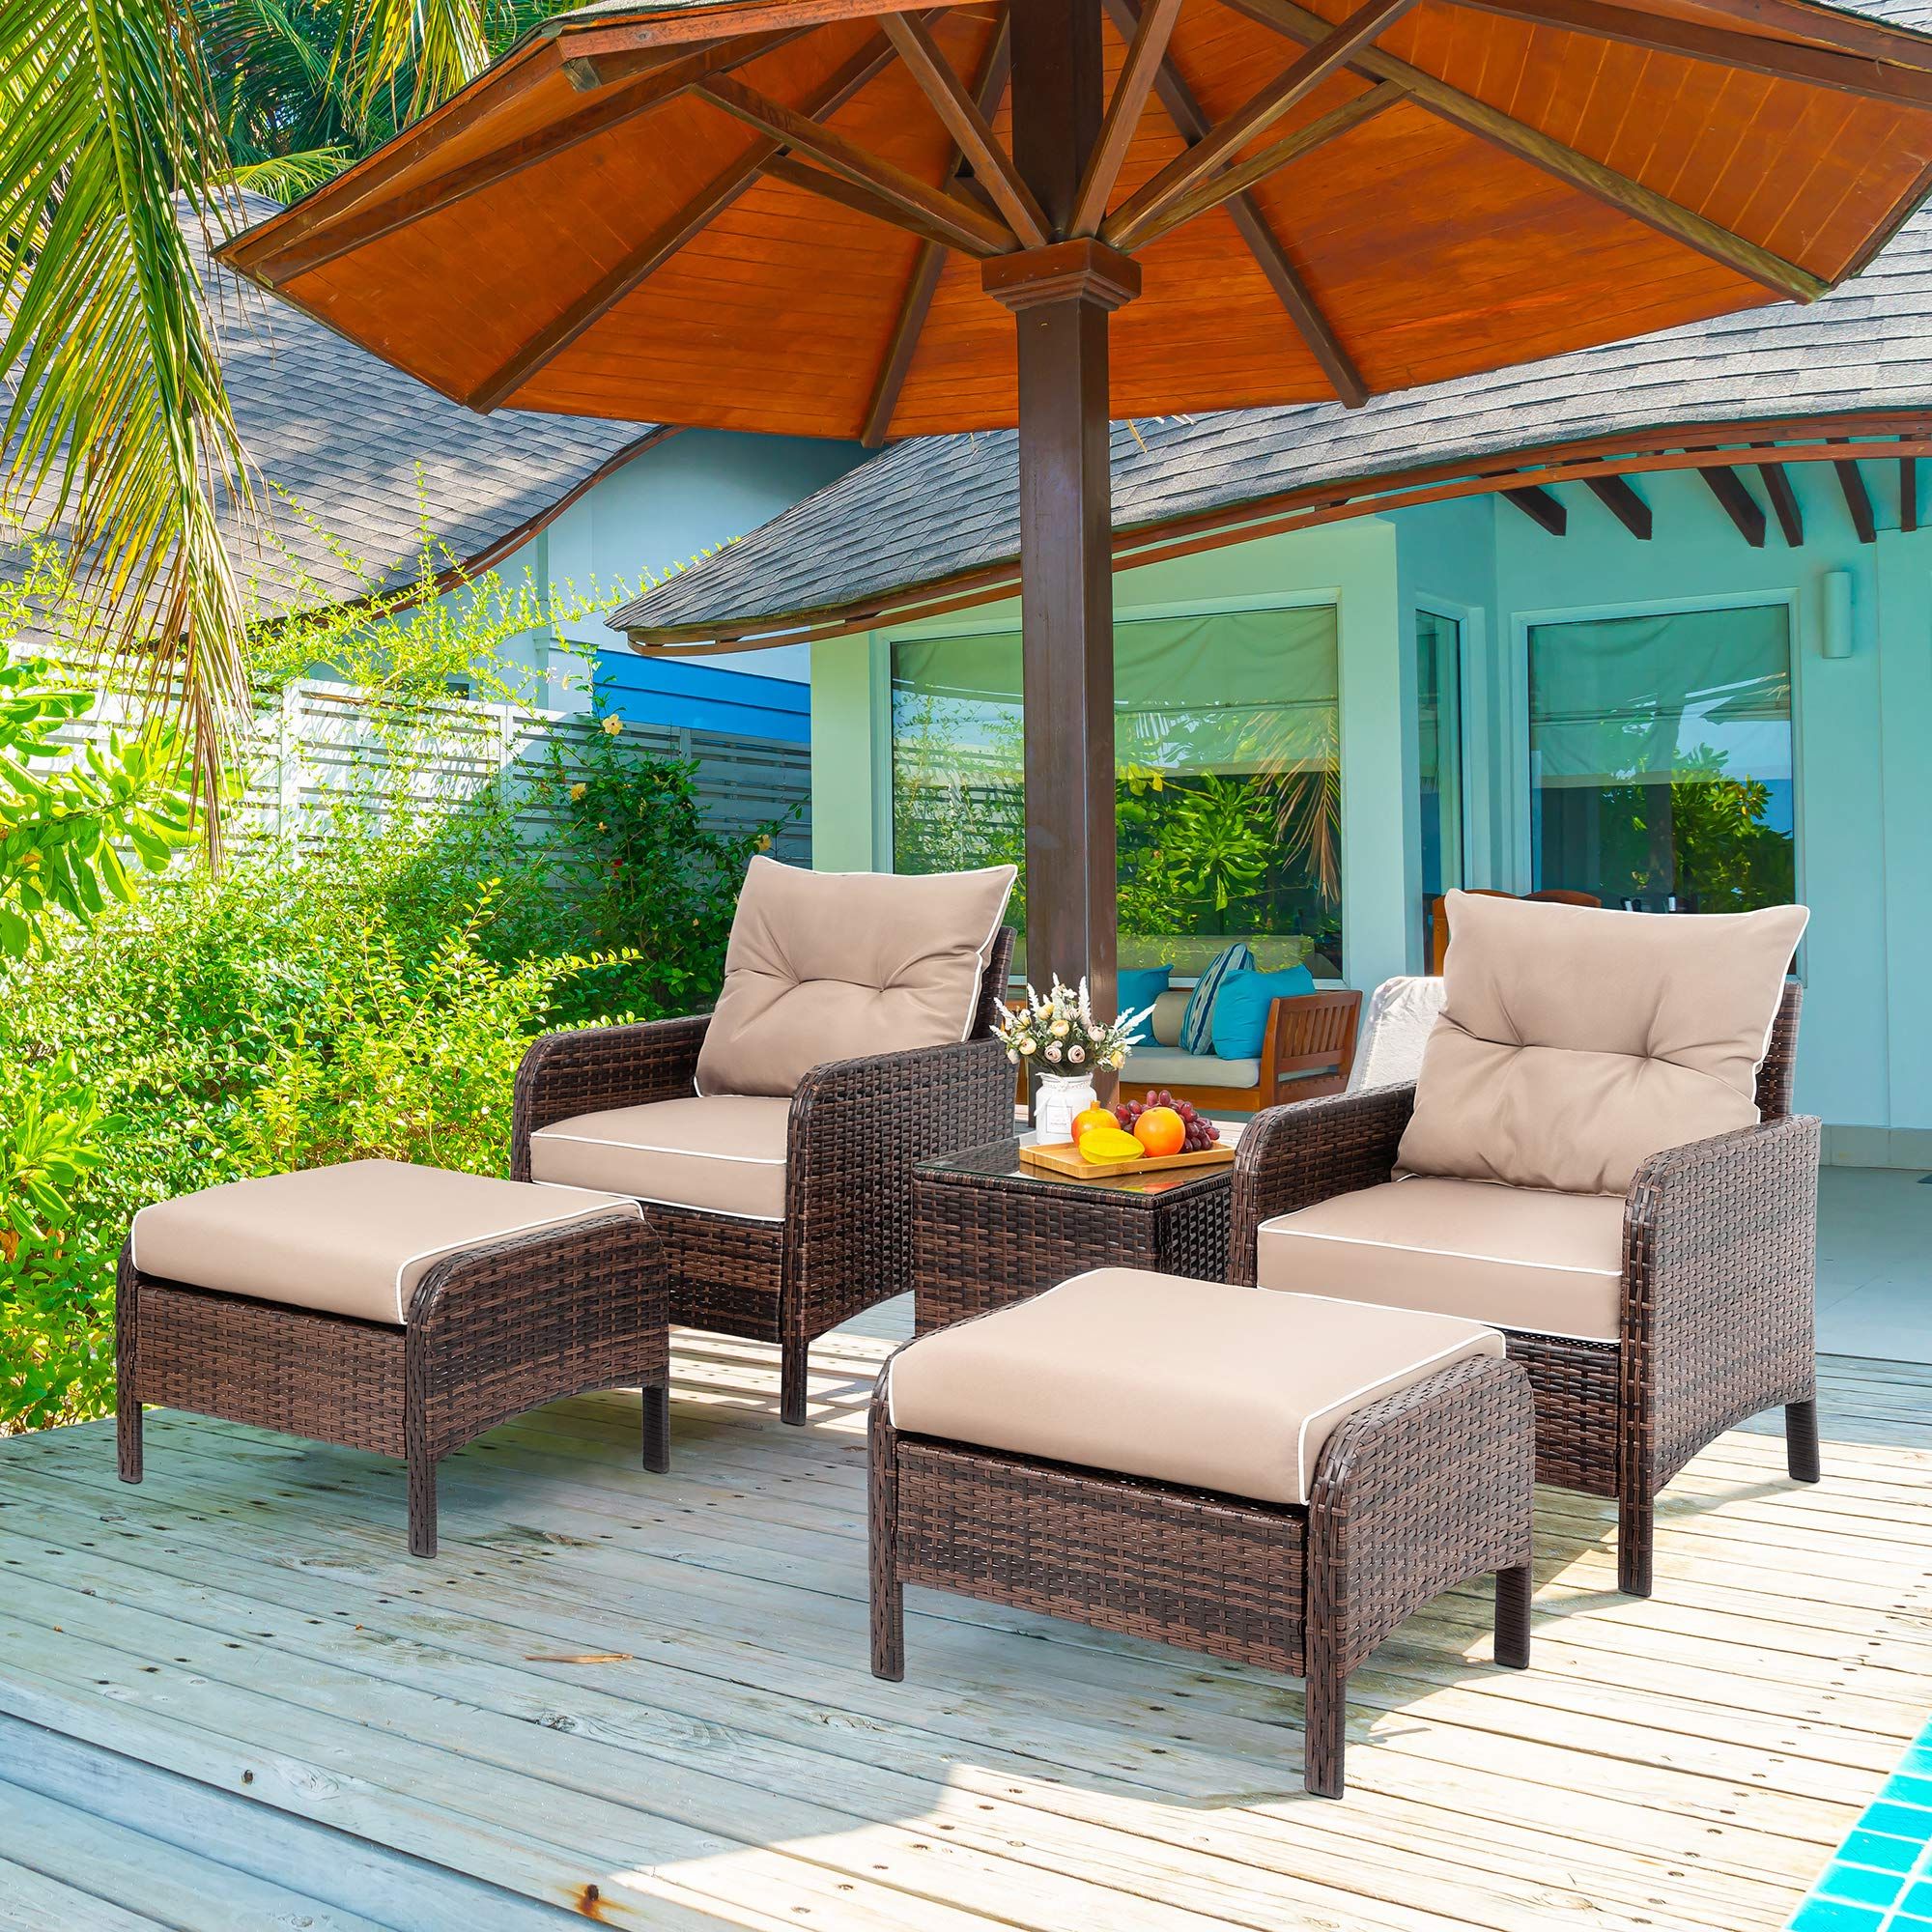 Most Recent Amazon: Vongrasig 5 Piece Wicker Patio Conversation Set, Pe Wicker  Rattan Outdoor Lounge Chairs Set Of 2 With Soft Cushions, Ottomans And  Glass Table For Porch, Garden, Brown : Patio, Lawn & Garden With Brown Wicker Chairs With Ottoman (View 5 of 15)